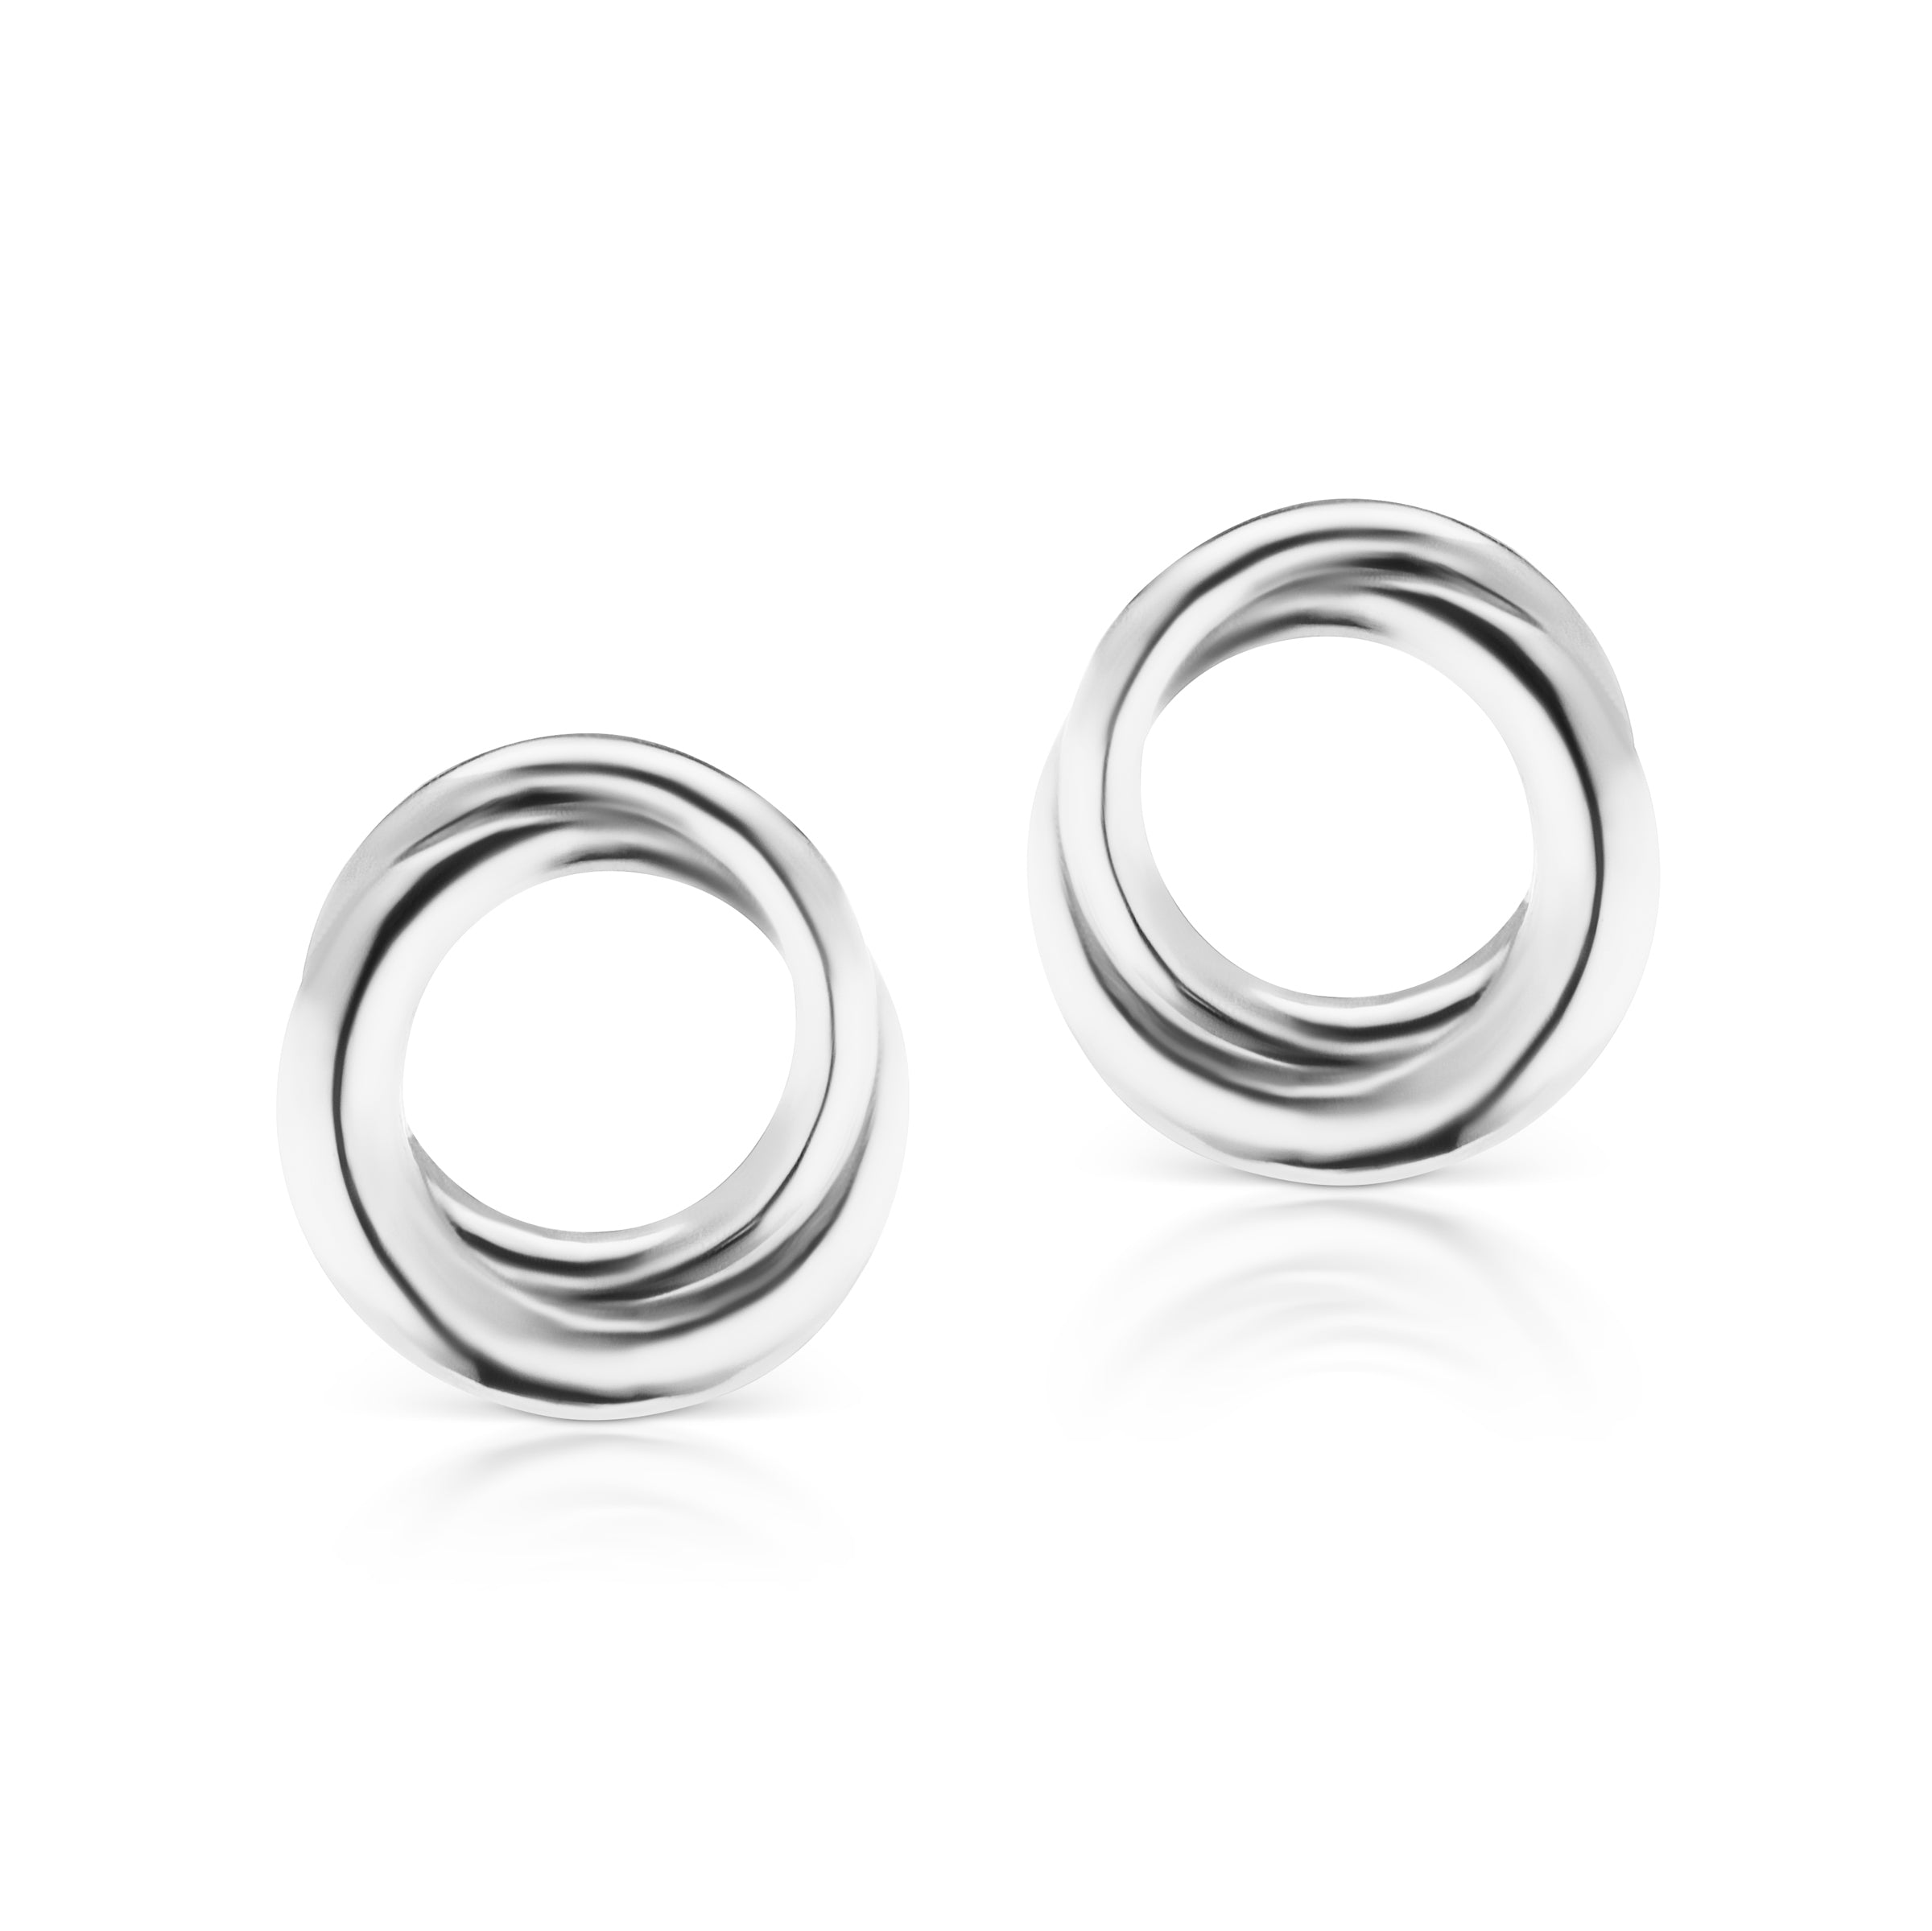 The Silver Encircle Studs